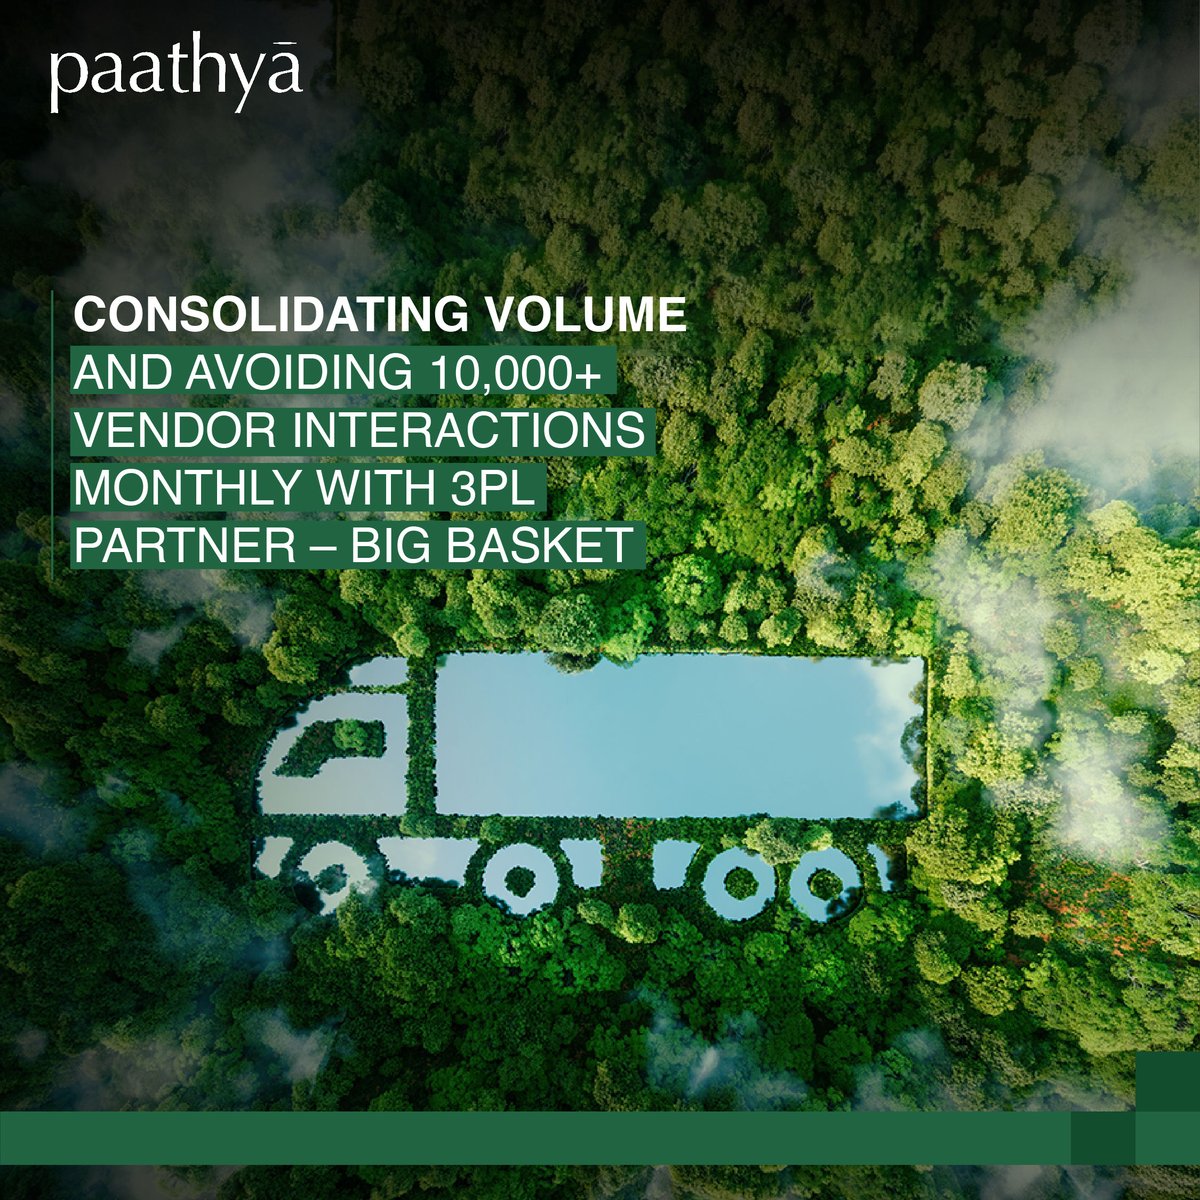 The Indian Hotels Company believes in generating more value for the communities and people who are involved in their supply chain. Check out this campaign where we talk about their partner-centric initiatives under the umbrella of Paathya.
#IHCL #CSR #Sustainability